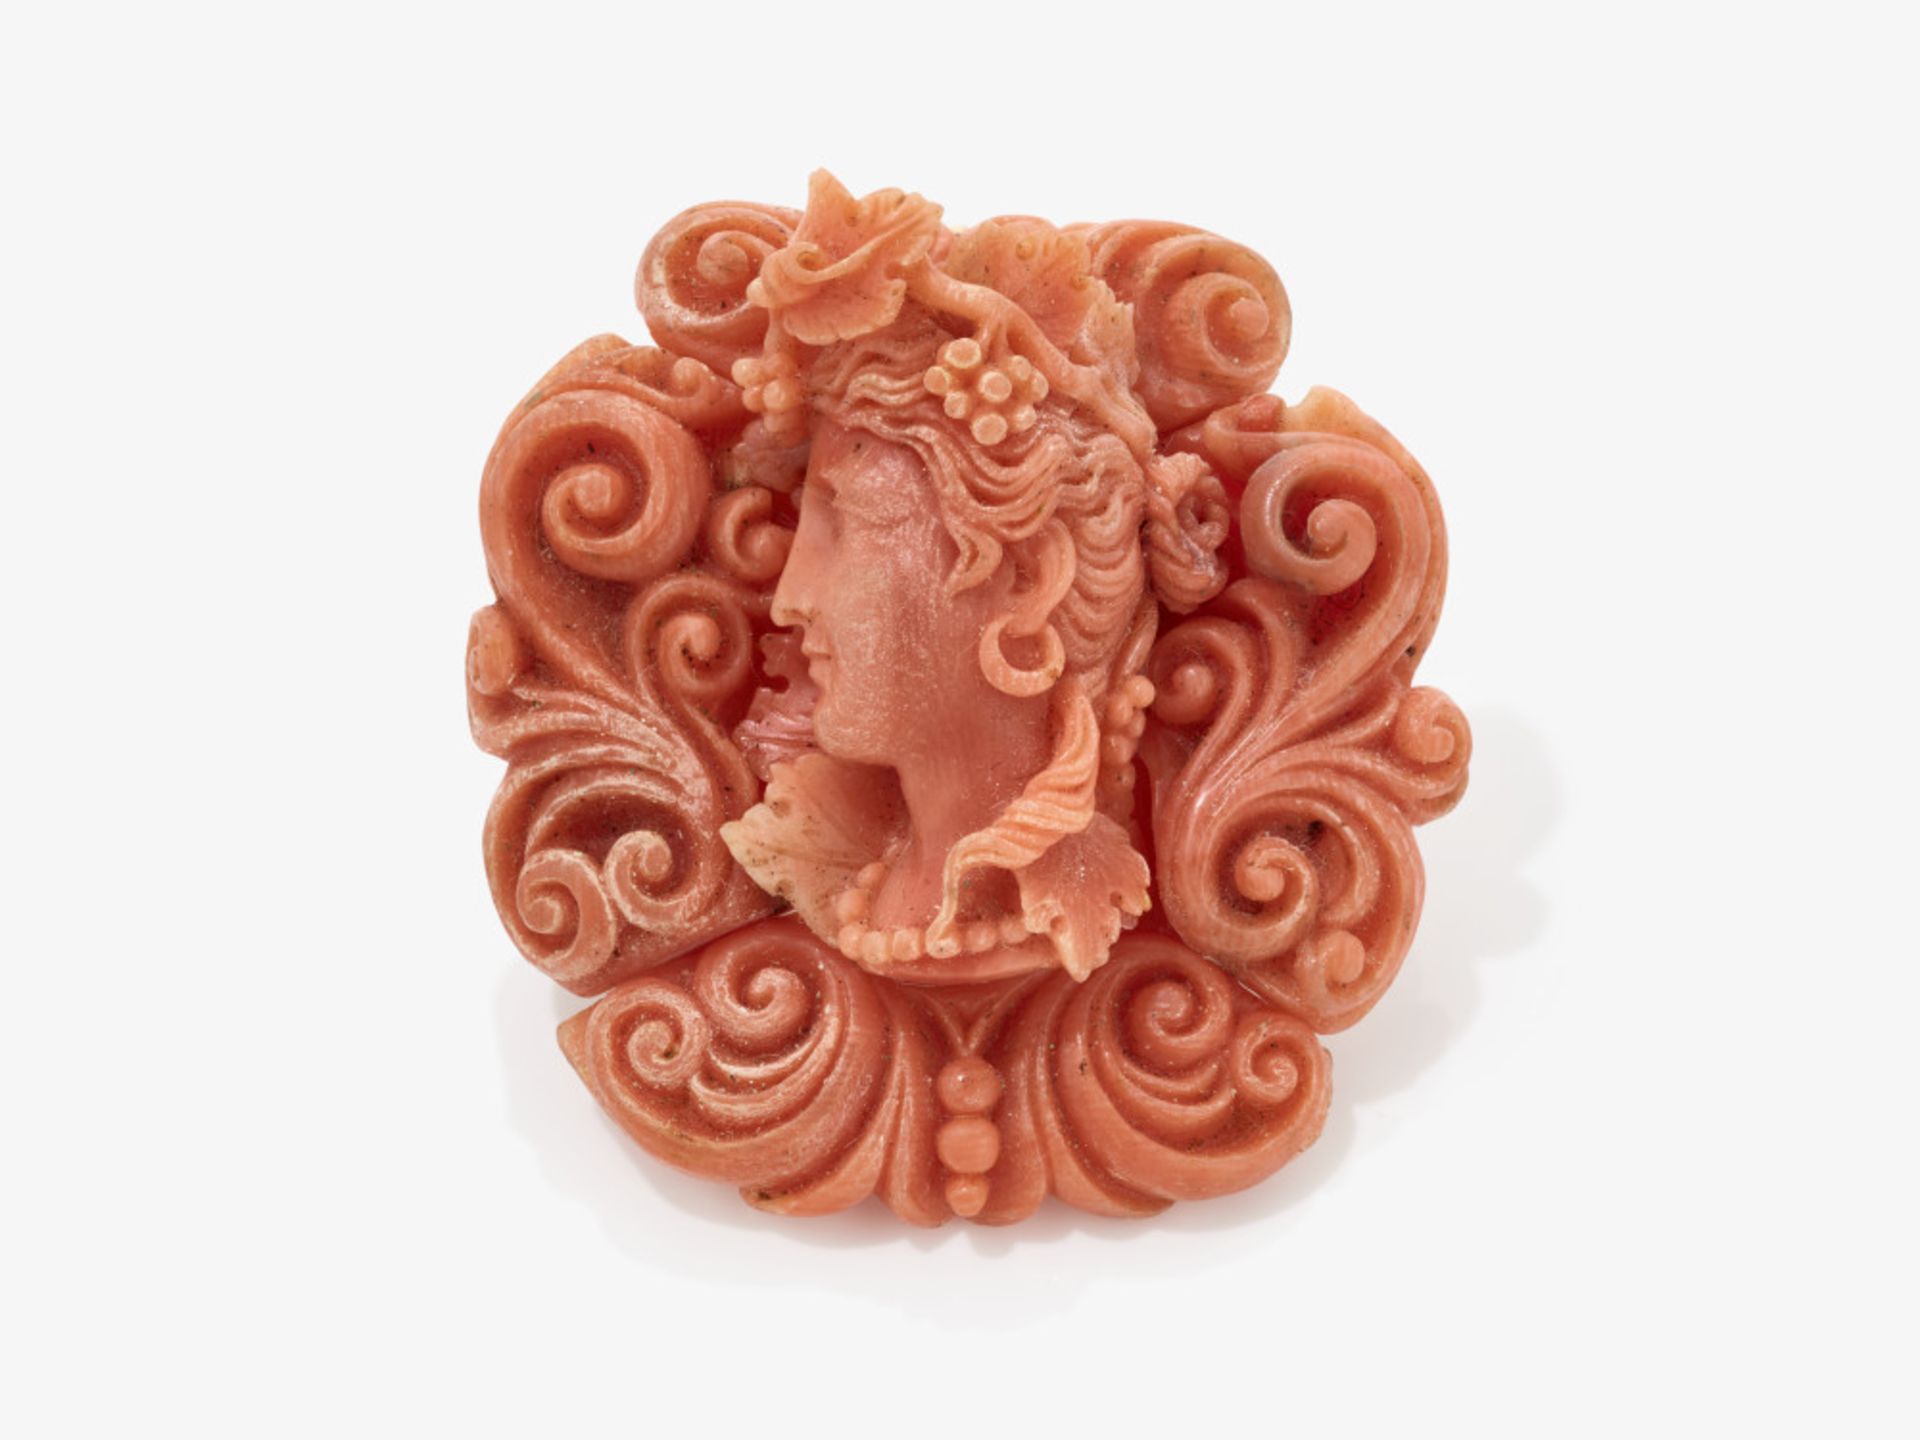 A historical coral pendant in high relief - Probably South Germany, 1850s - 1860s - Image 2 of 2